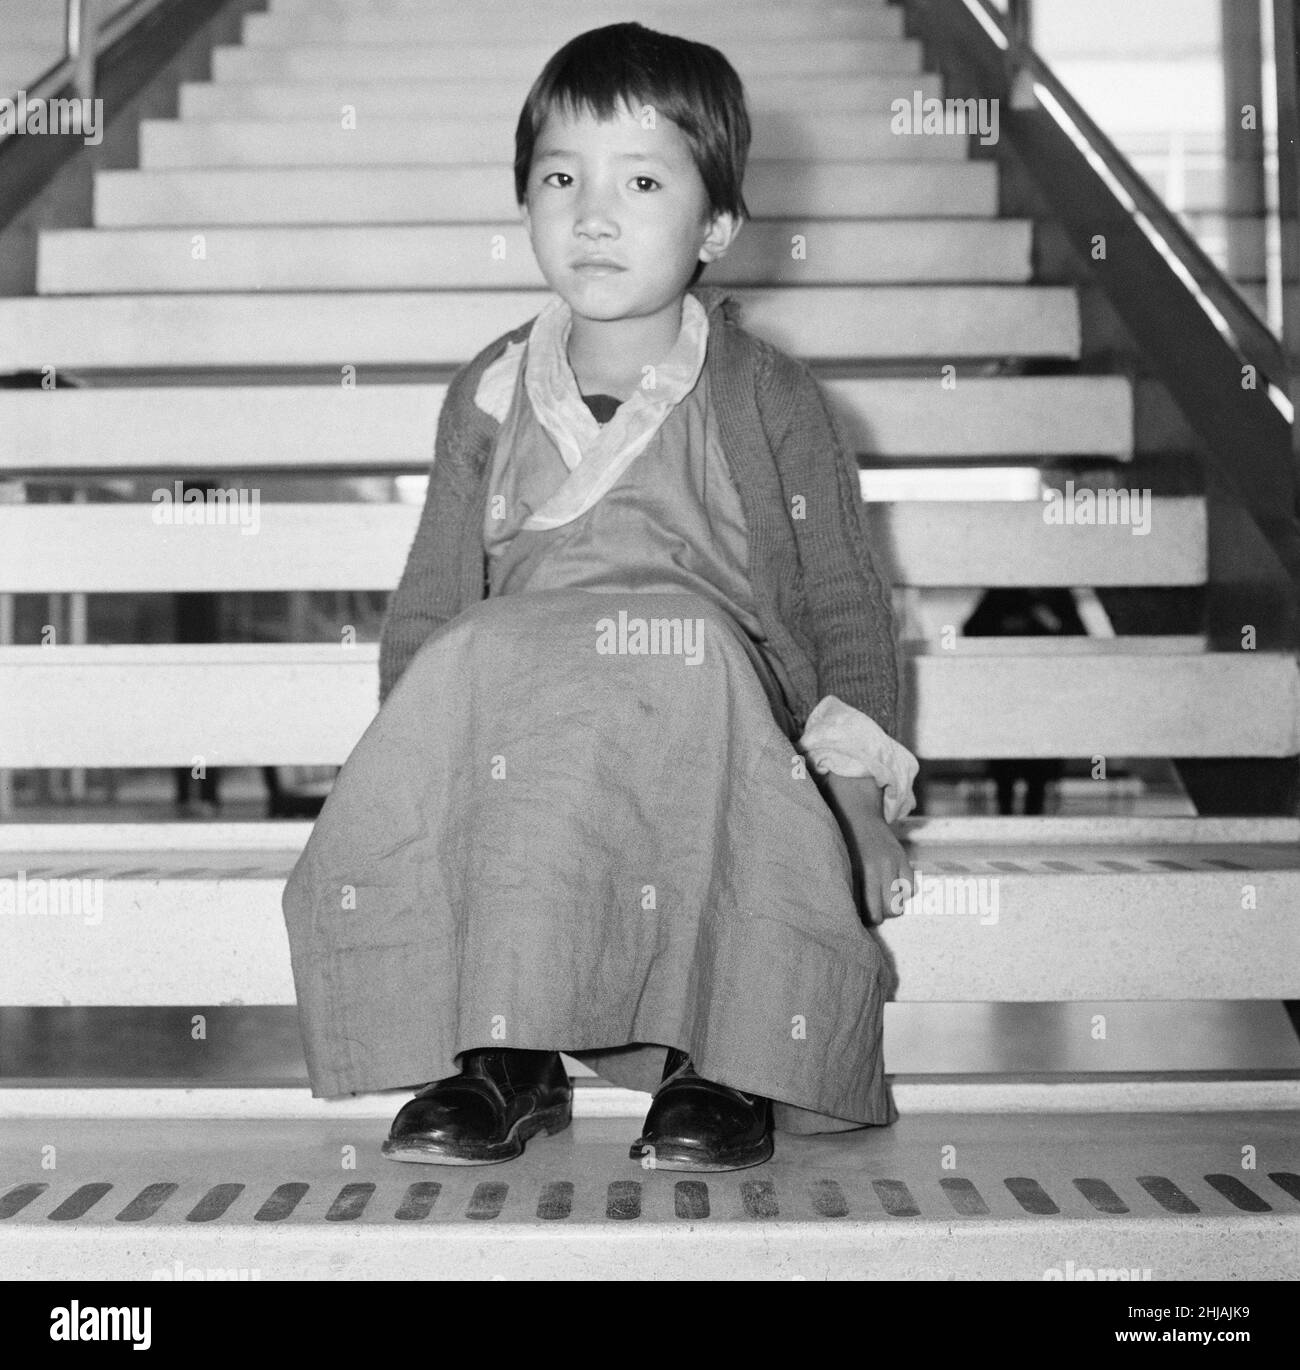 21 Tibetan Refugee Children land at London Heathrow Airport, Tuesday 26th February 1963. A BOAC Airliner brings the thirteen boys and eight girls to the UK, from a refugee camp in northern India. Many now orphaned, the children have fled chinese occupation and persecution.   Our Picture Show ... five year old Kalasang Youdon sits alone on the steps of the airport.  The children are to be relocated to the Pestalozzi Village for Children in Sedlescombe, East Sussex, which will be their new home for the next ten years.   The community is named after eighteenth century Swiss educationalist, Johann Stock Photo